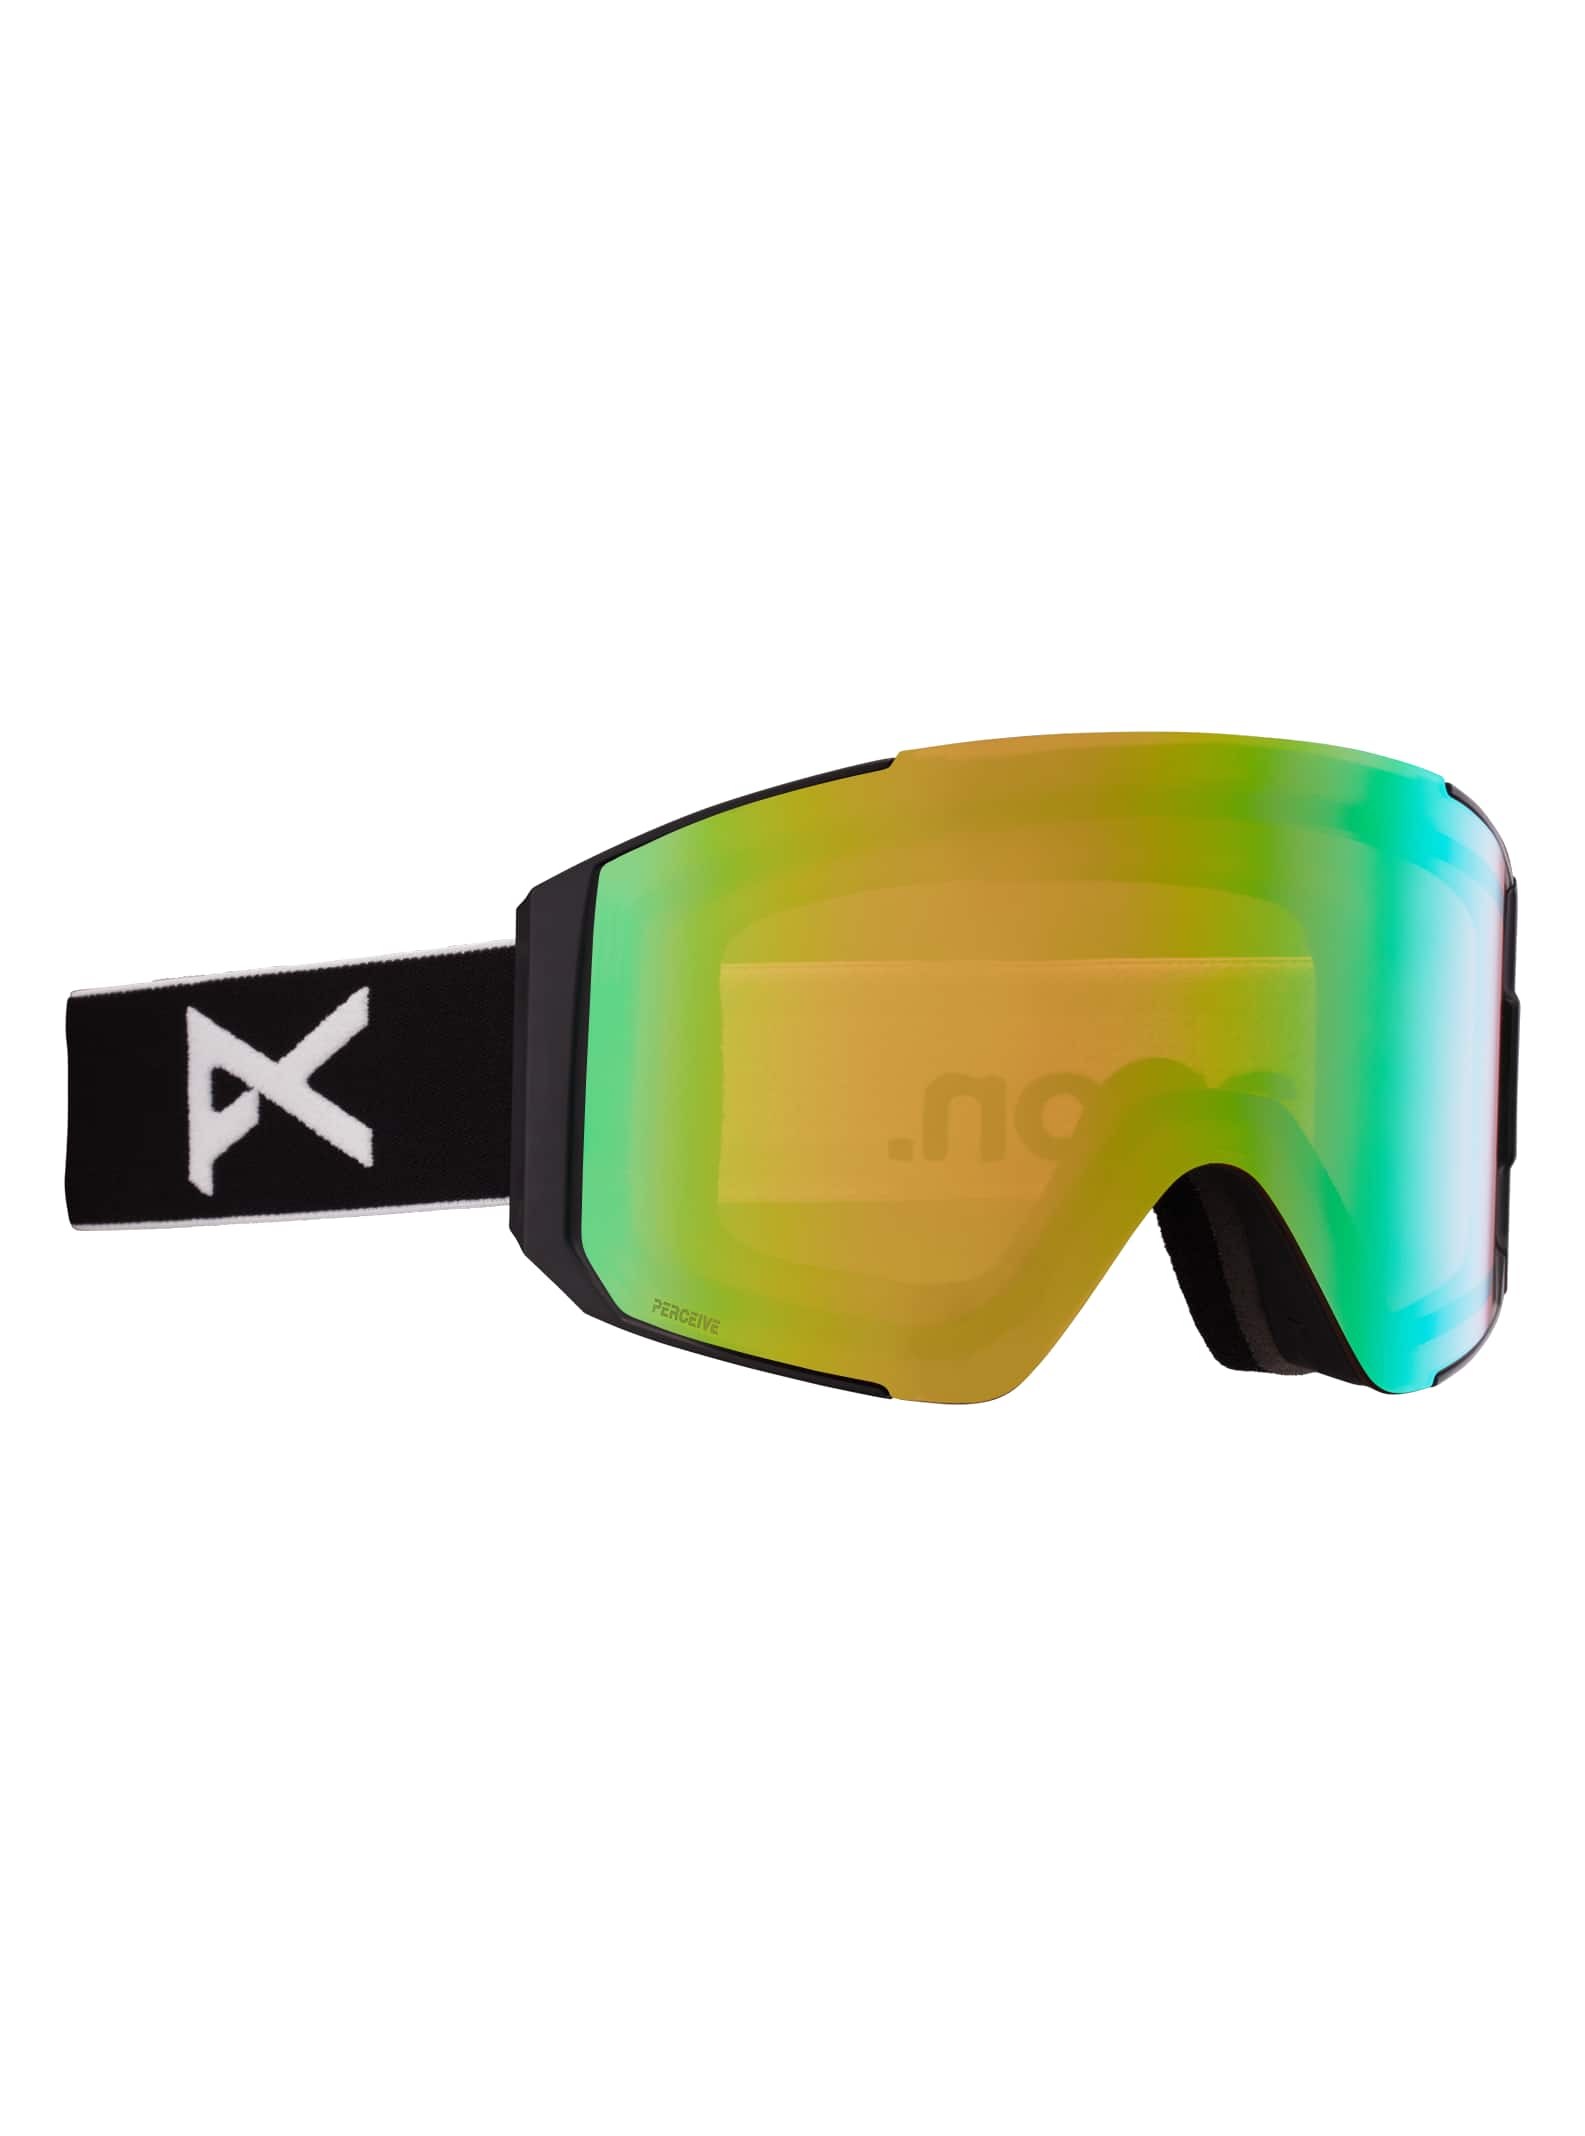 Anon Anon Sync Goggles + Bonus Lens Frame: black, lens: perceive variable green (22% / s2), spare lens: perceive cloudy pink (53% / s1)